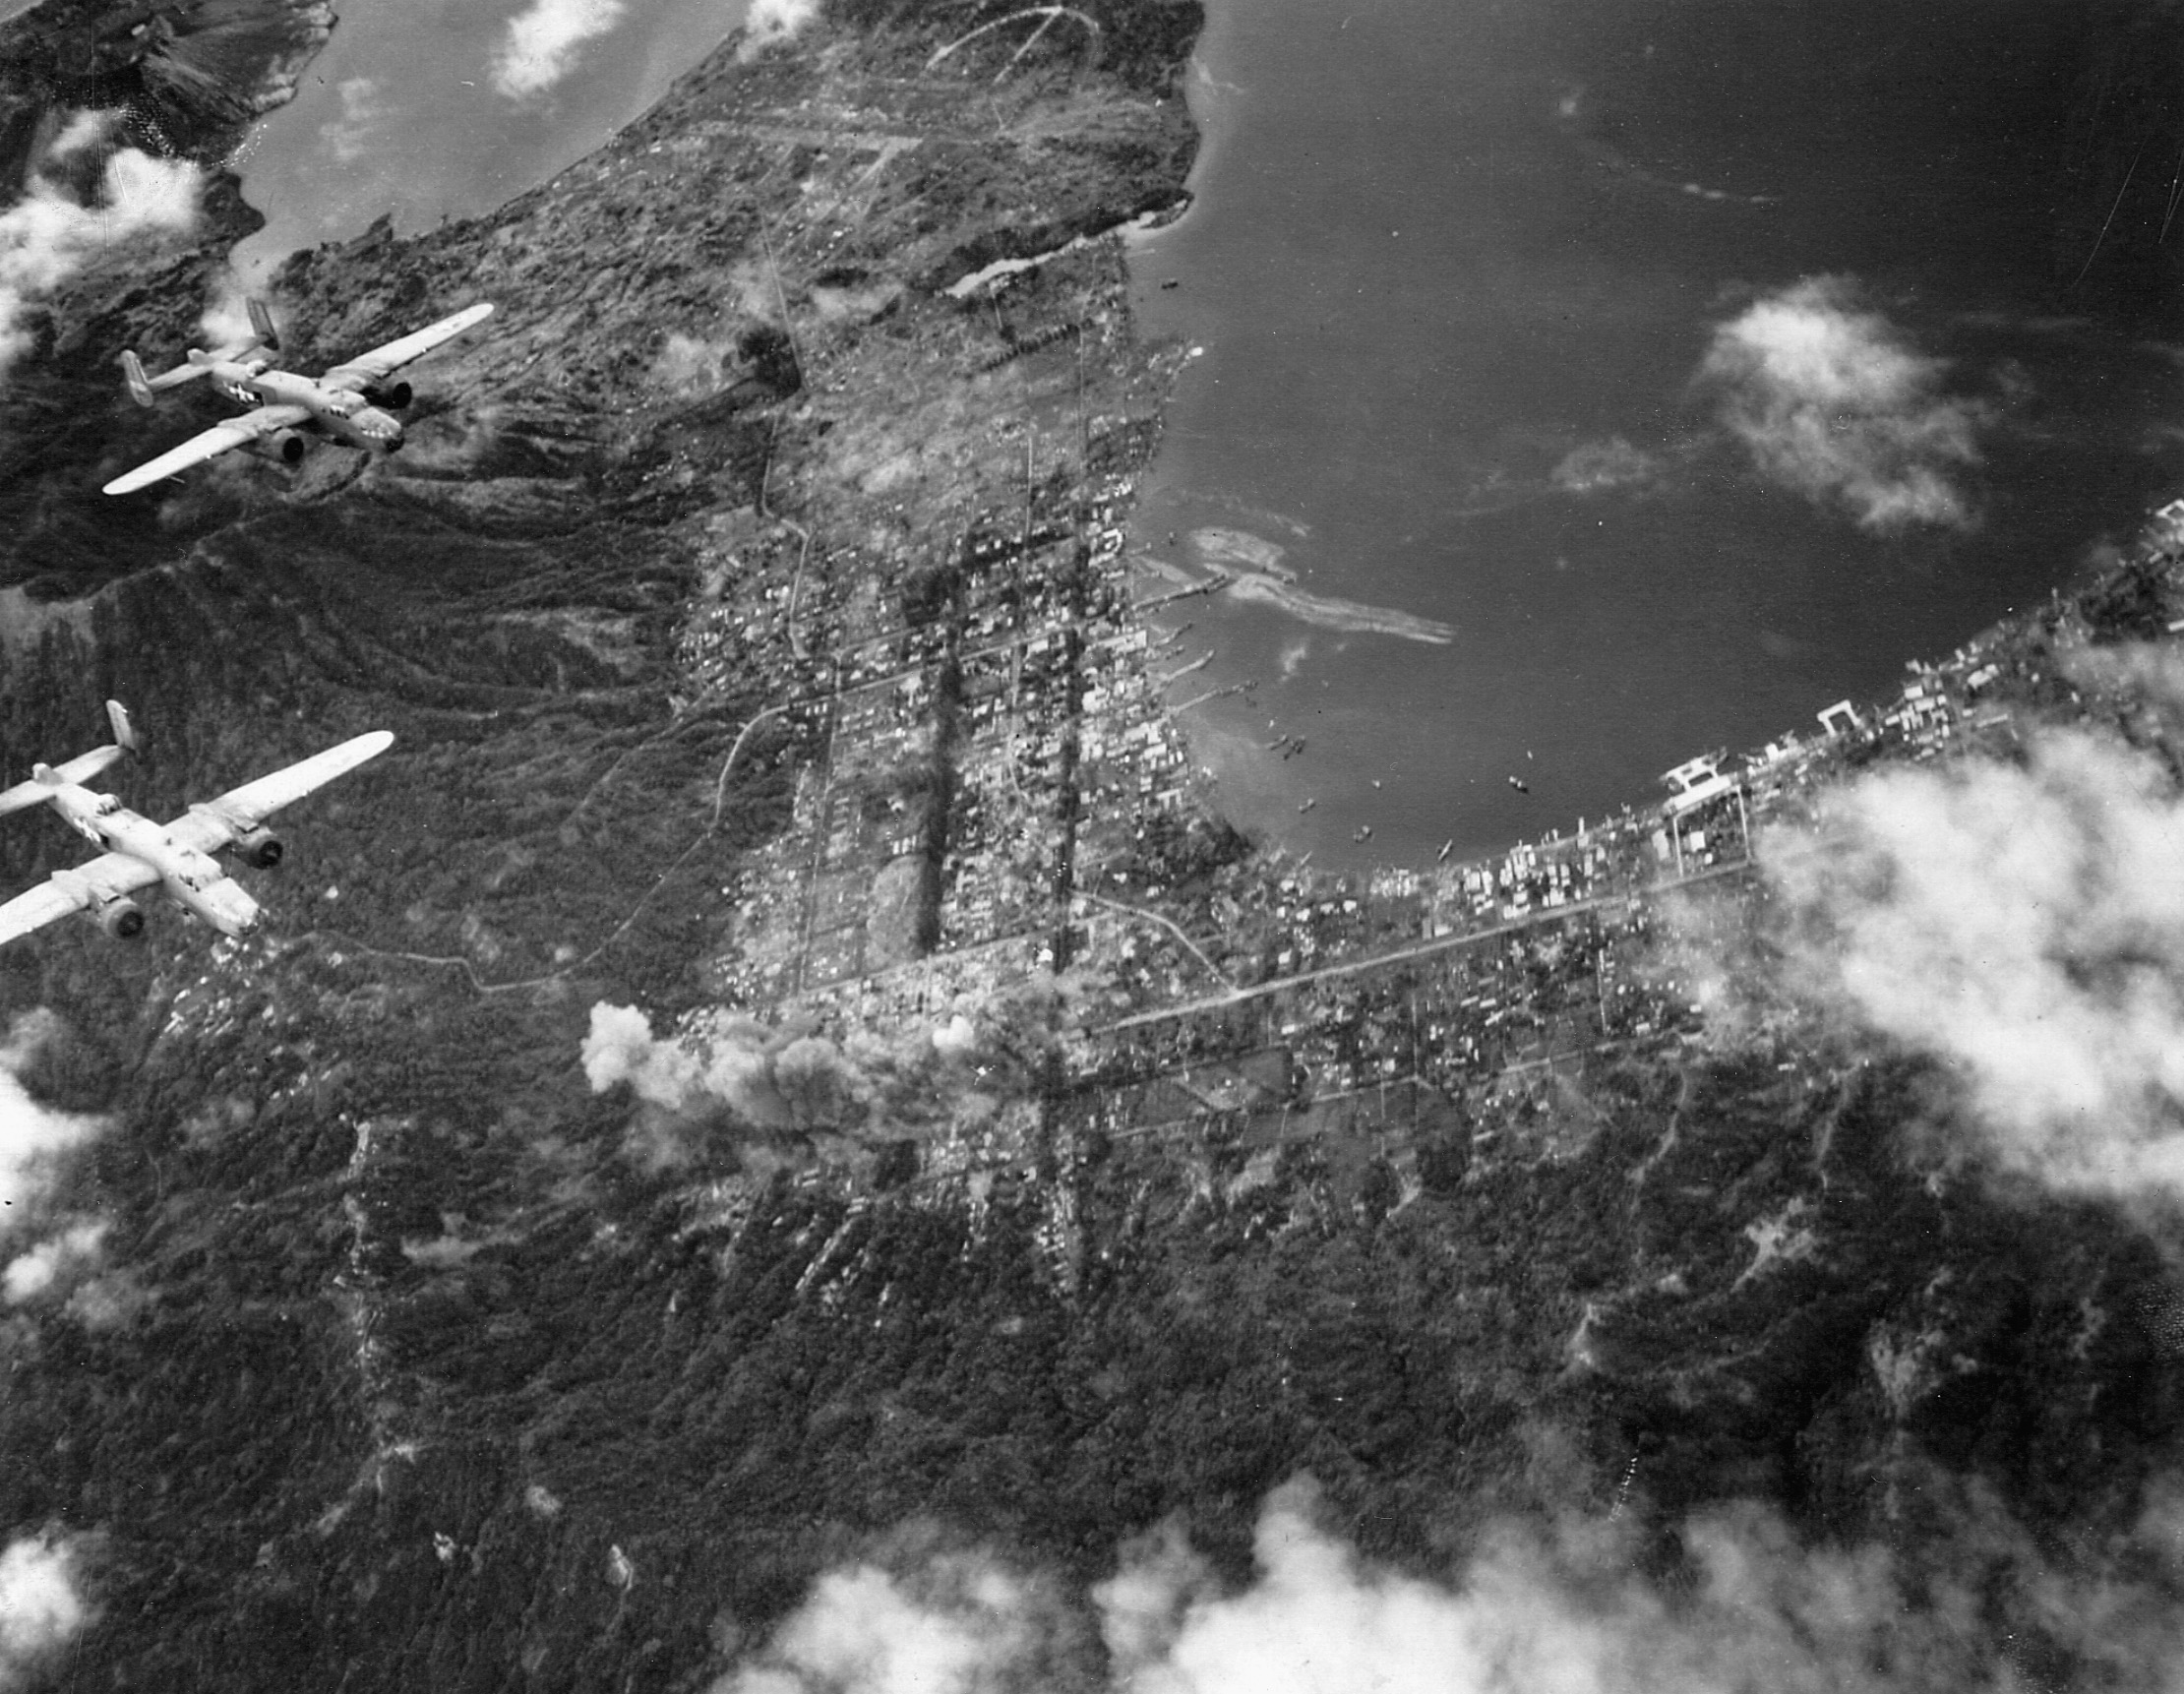 U.S. B-25 Mitchell bombers of the 13th Air Force wing their way above the Japanese bastion at Rabaul in March 1944. The major Japanese supply base and staging area was repeatedly bombed during the American offensive in the South Pacific.